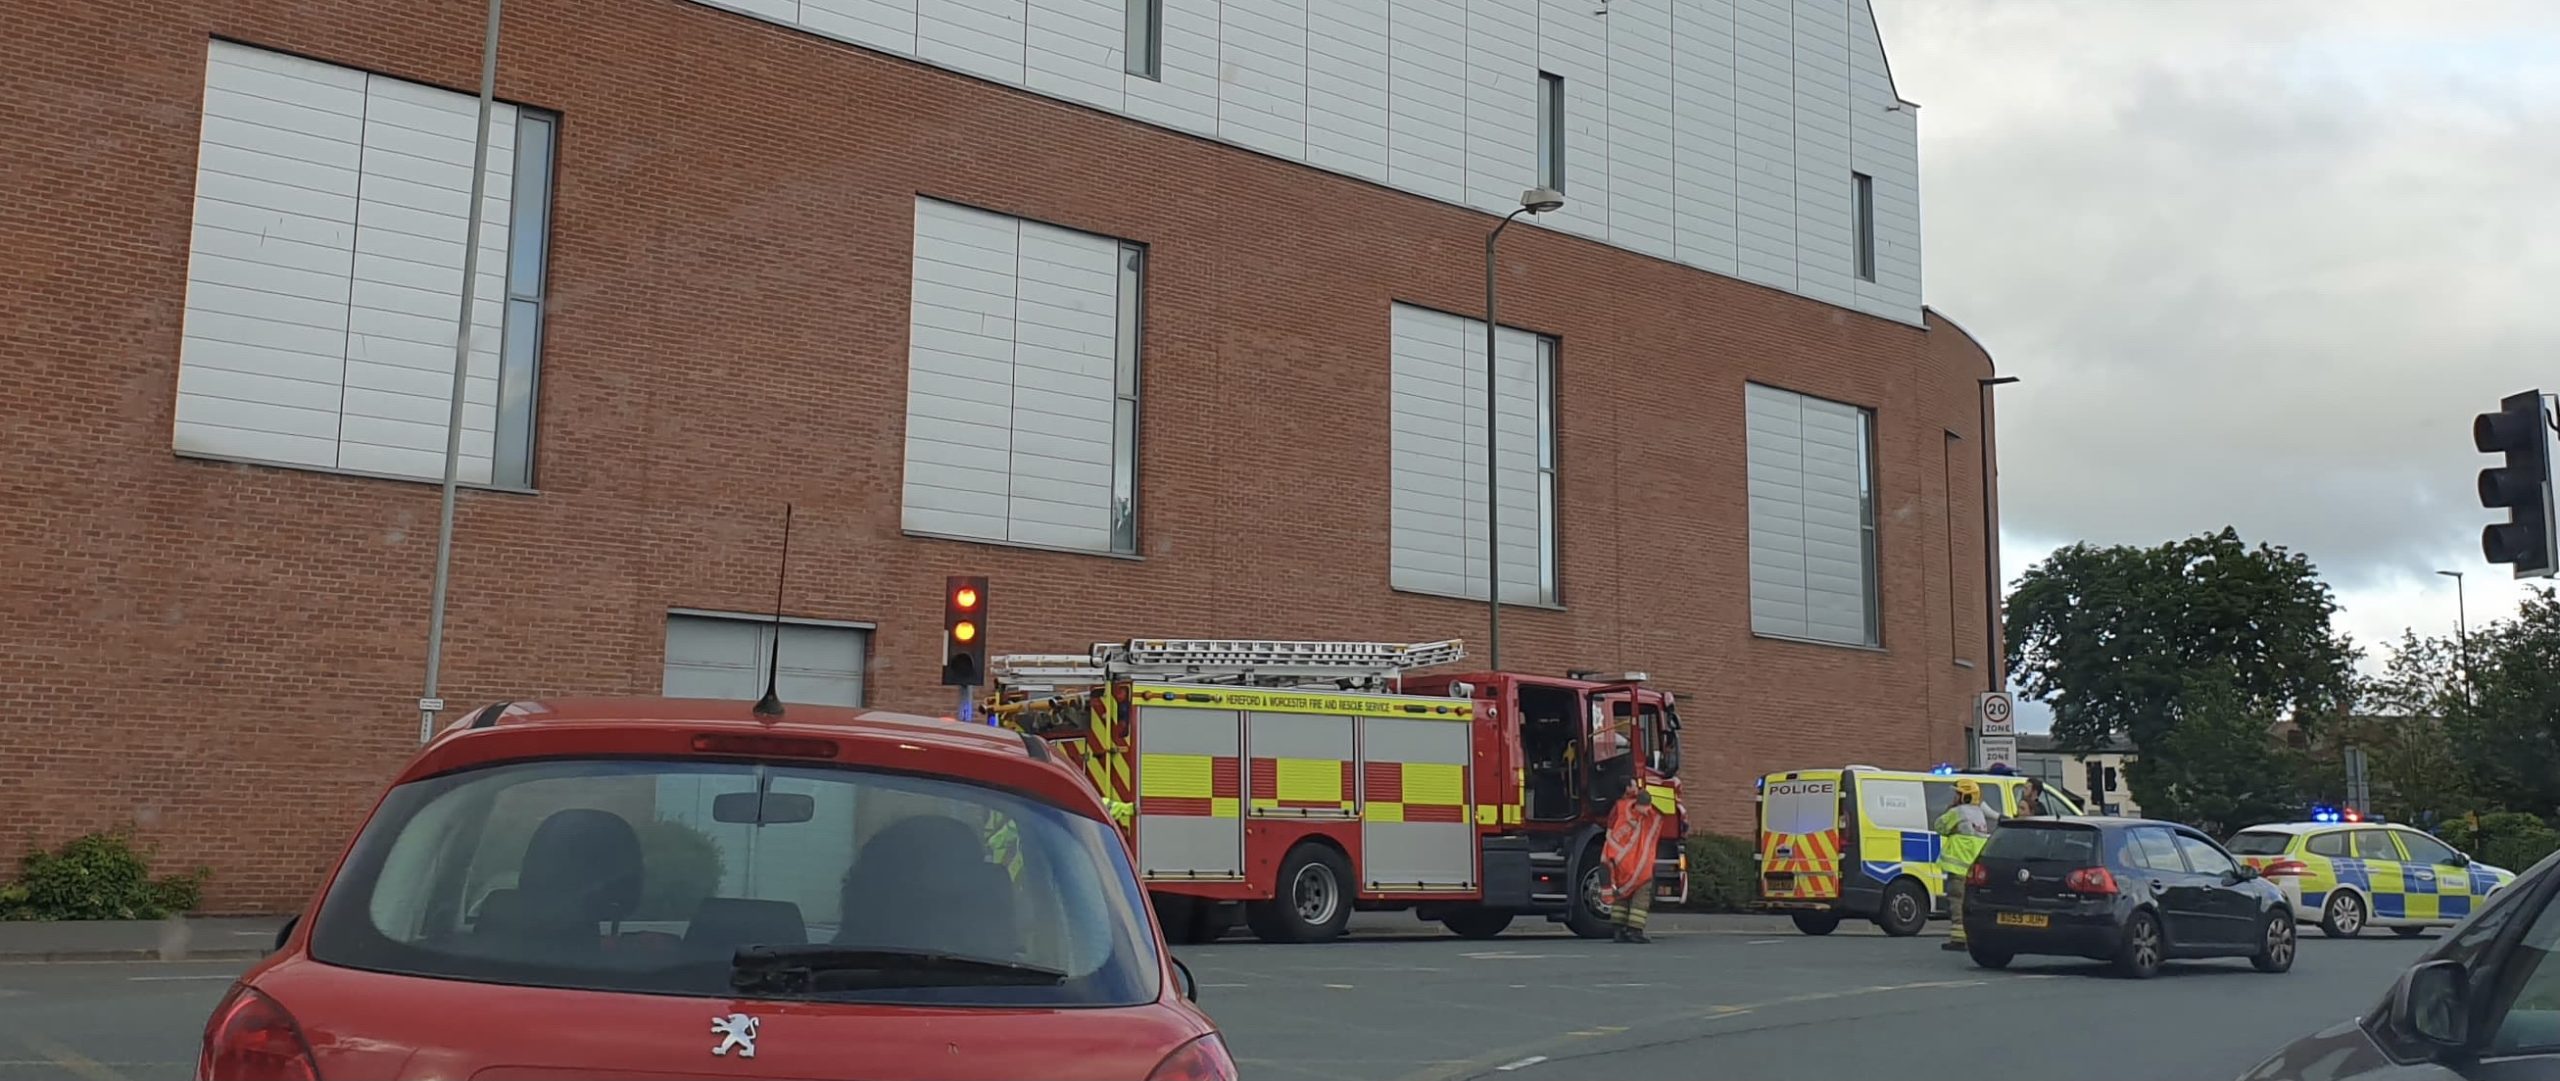 NEWS | Hereford & Worcester Fire and Rescue Service provide update on incident that occurred in Hereford city centre yesterday evening